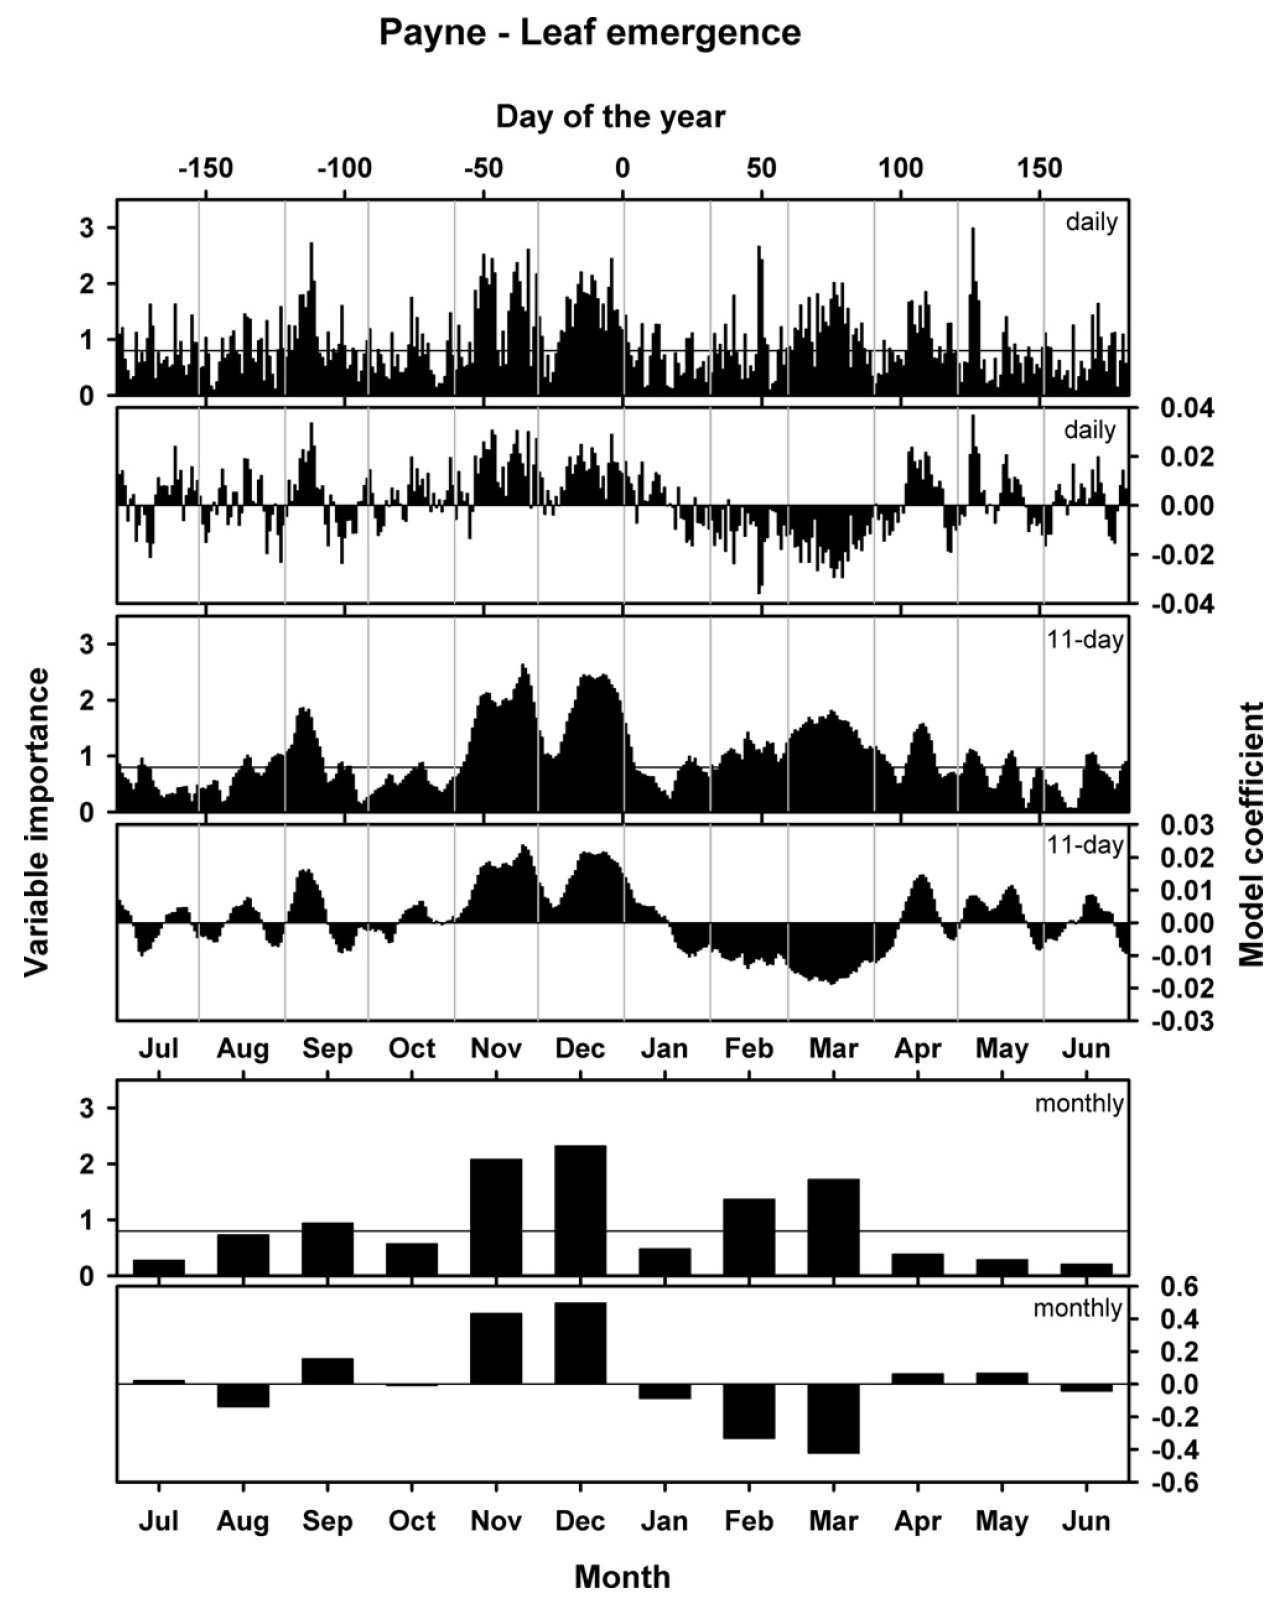 Results of a PLS regression analysis of the relationship between leaf emergence of ‘Payne’ walnuts in Davis, California, and daily mean temperature during the dormant season (Luedeling et al., 2012)